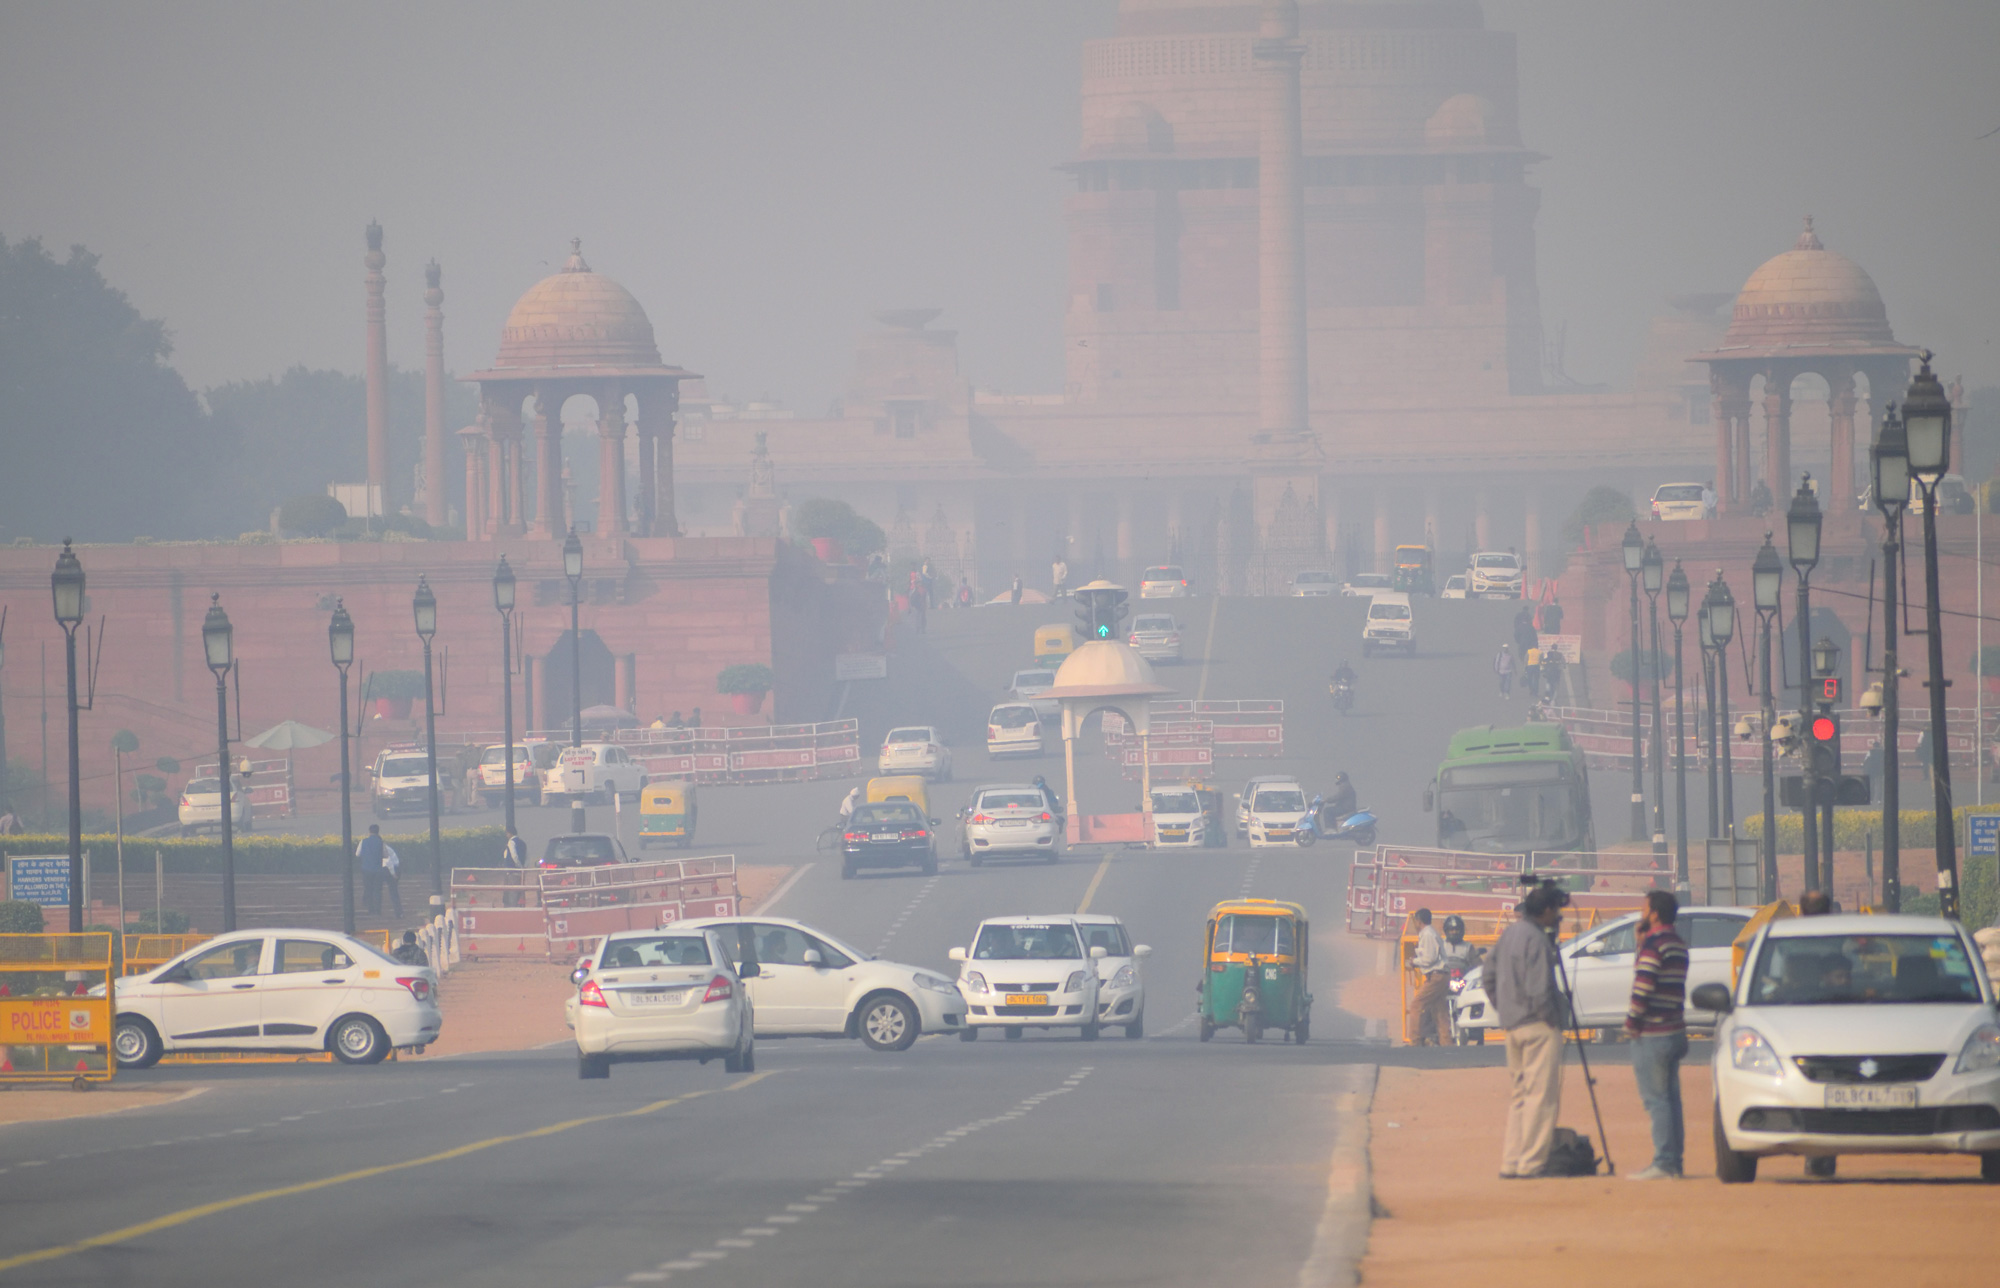 Vehicles moving on the road amidst heavy smog in New Delhi last winter.